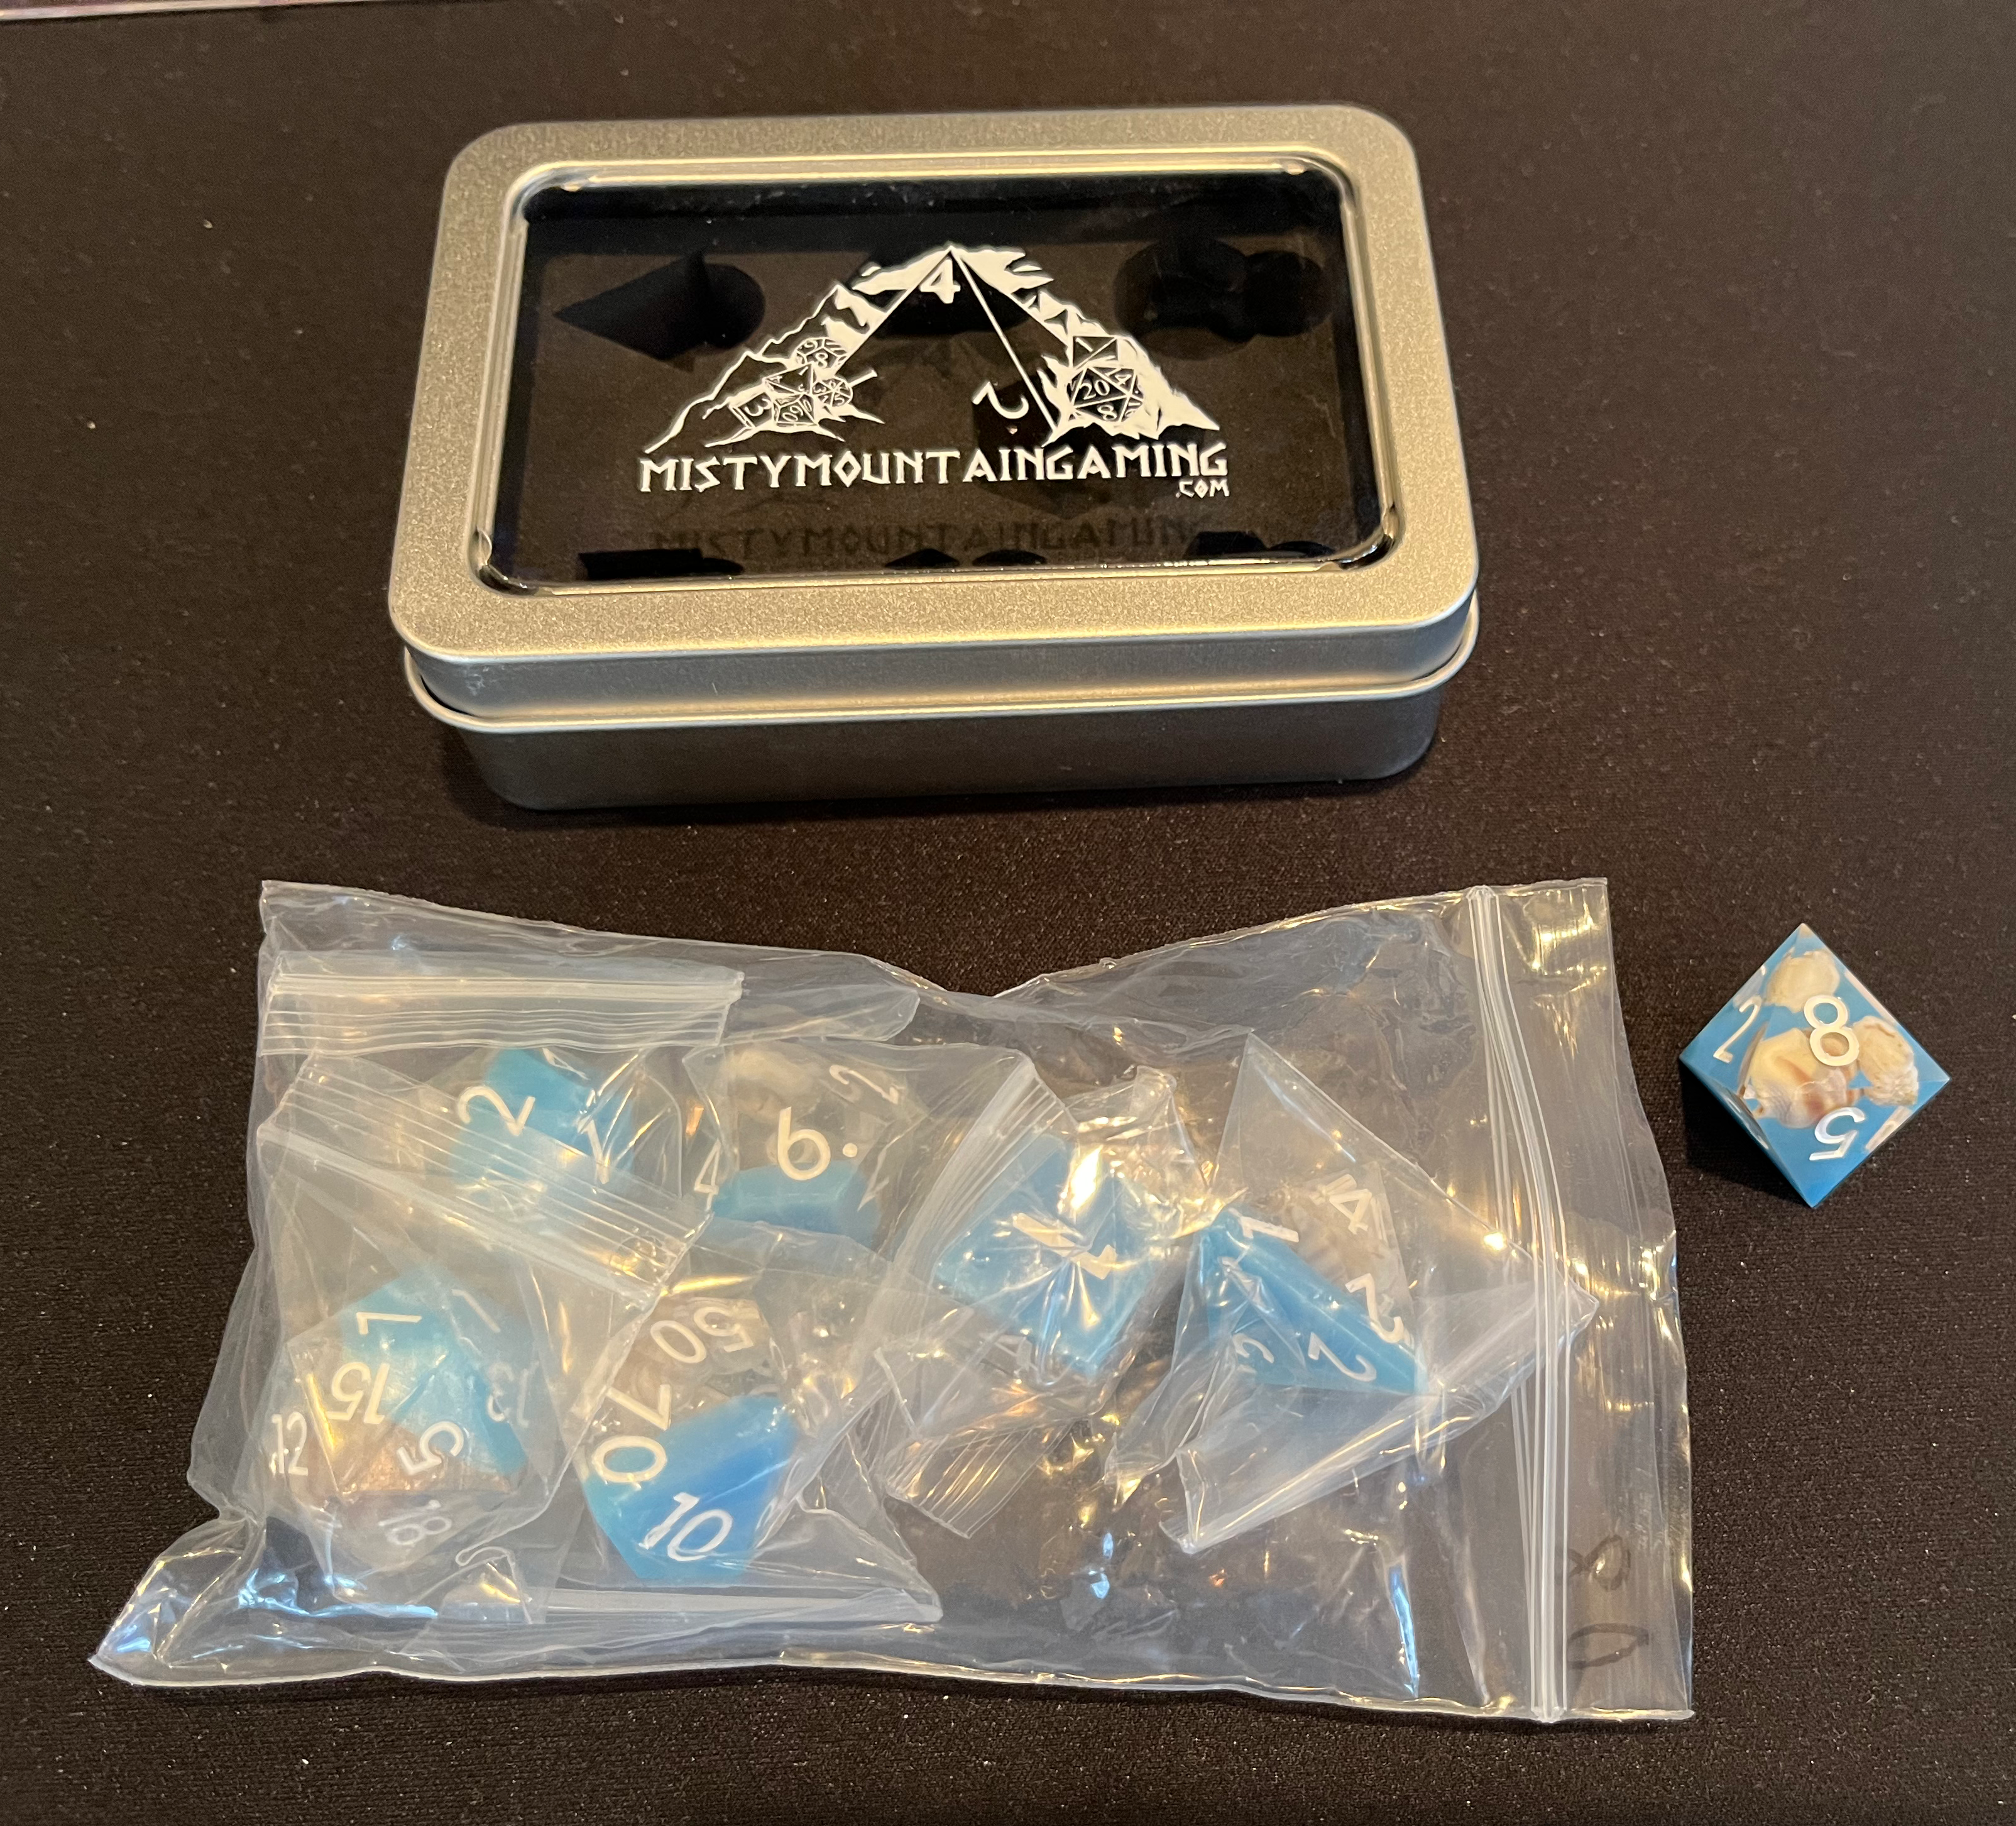 A plastic baggie filled with other, very small plastic baggies, one per die, containing a standard set of 7 roleplaying dice. There is also a small display/storage case with the store logo on top.